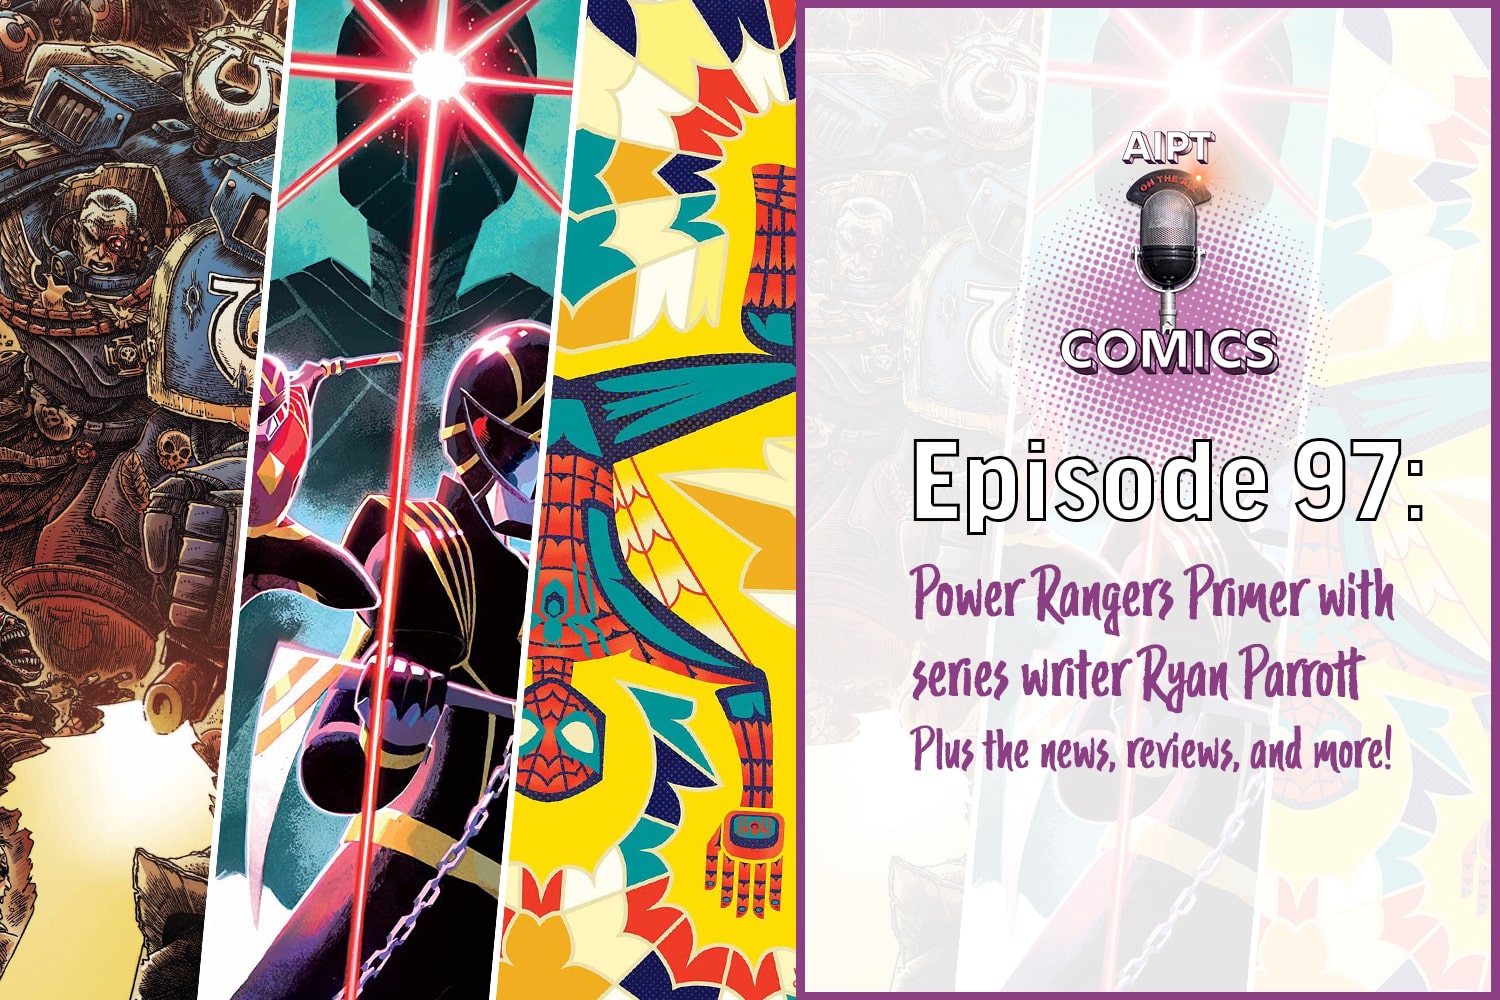 AIPT Comics Podcast Episode 97: Ryan Parrott discusses new series 'Power Rangers' and 'Mighty Morphin'